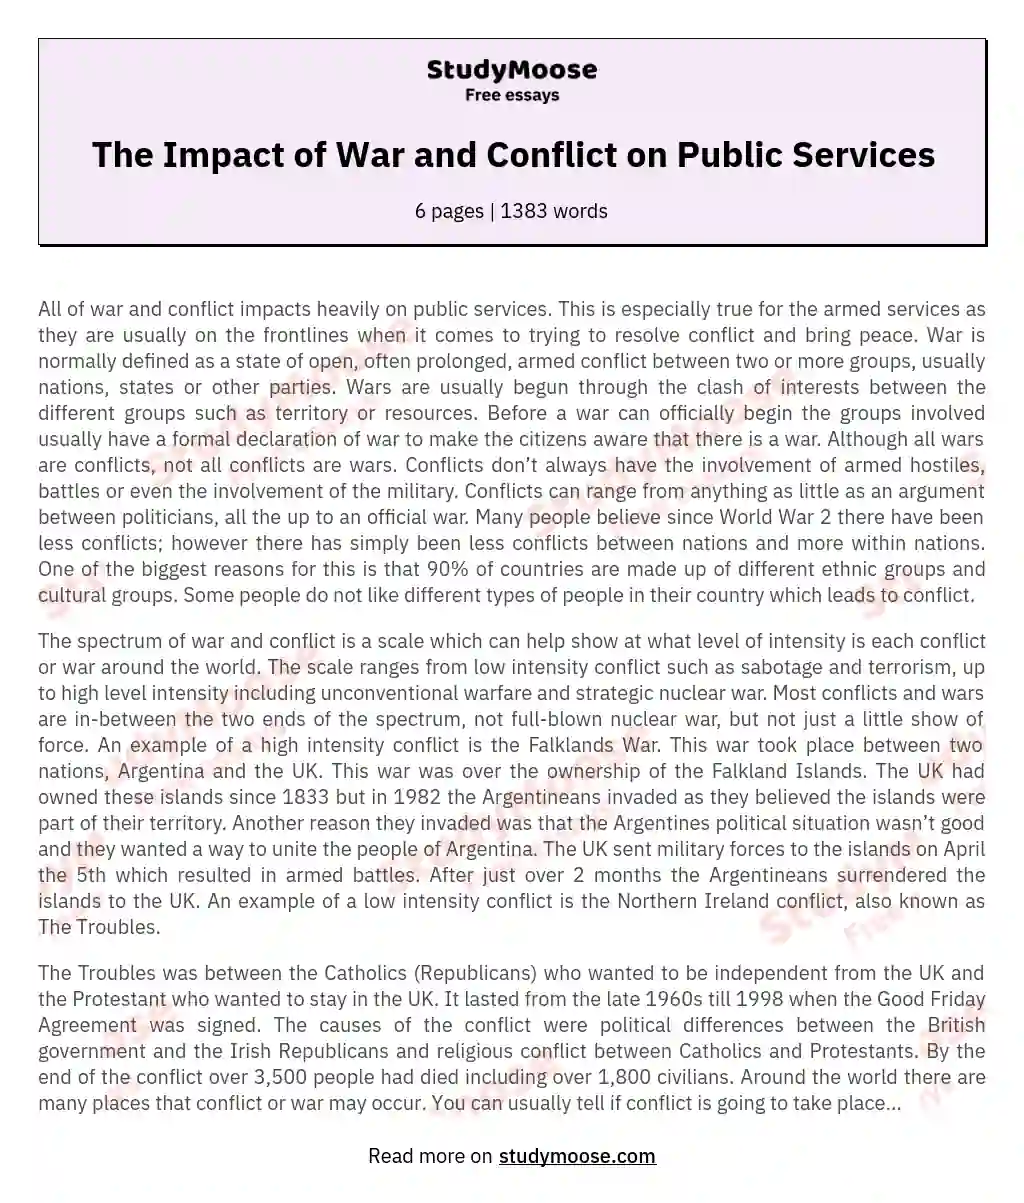 The Impact of War and Conflict on Public Services essay